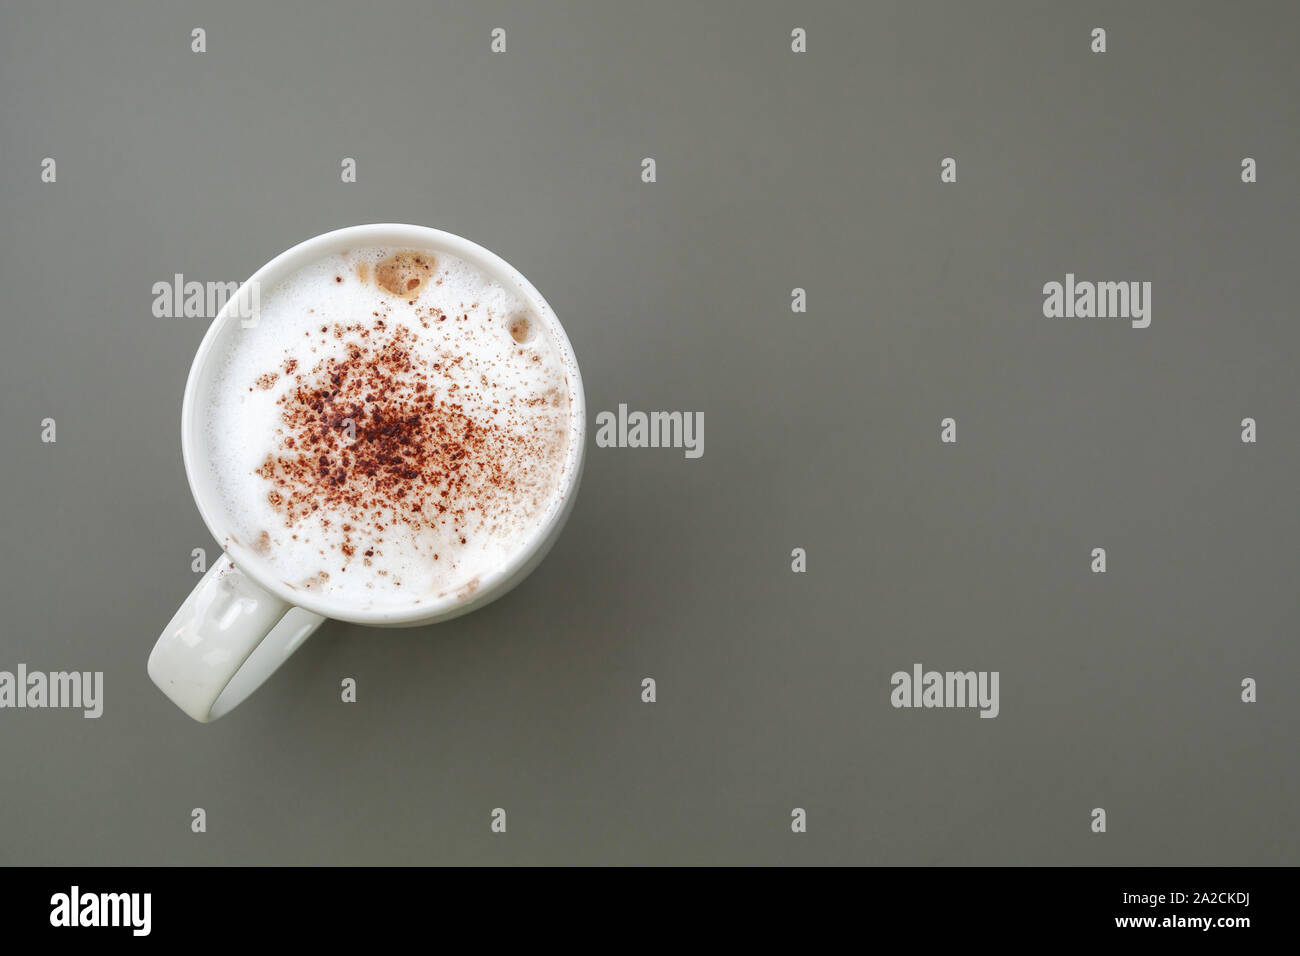 Cappuccino top view. Cup of coffee with milk foam and cinnamon stands on a gray table. Close-up photo with blank copy space area for text on the right Stock Photo